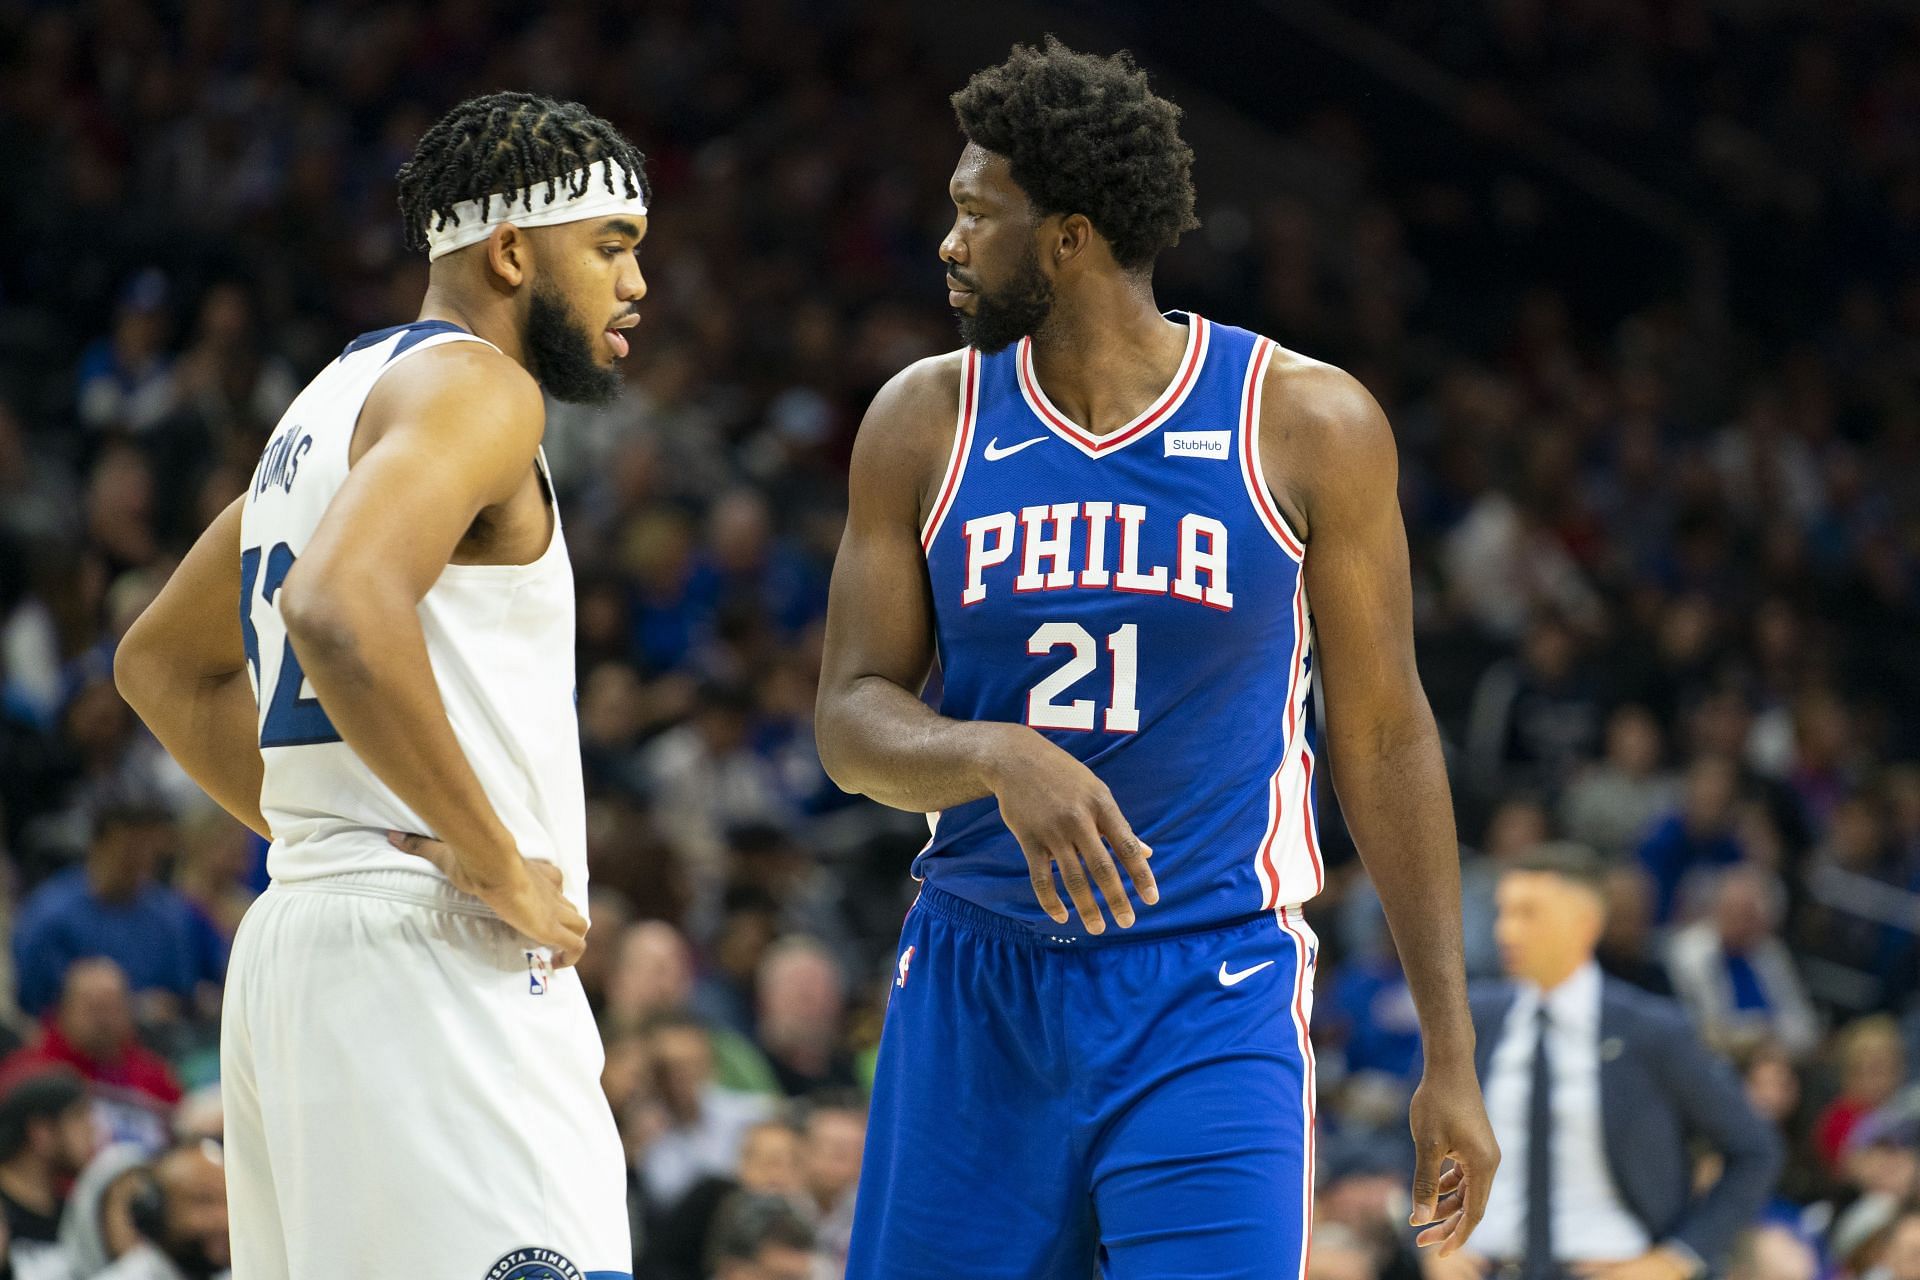 Karl-Anthony Towns and Joel Embiid